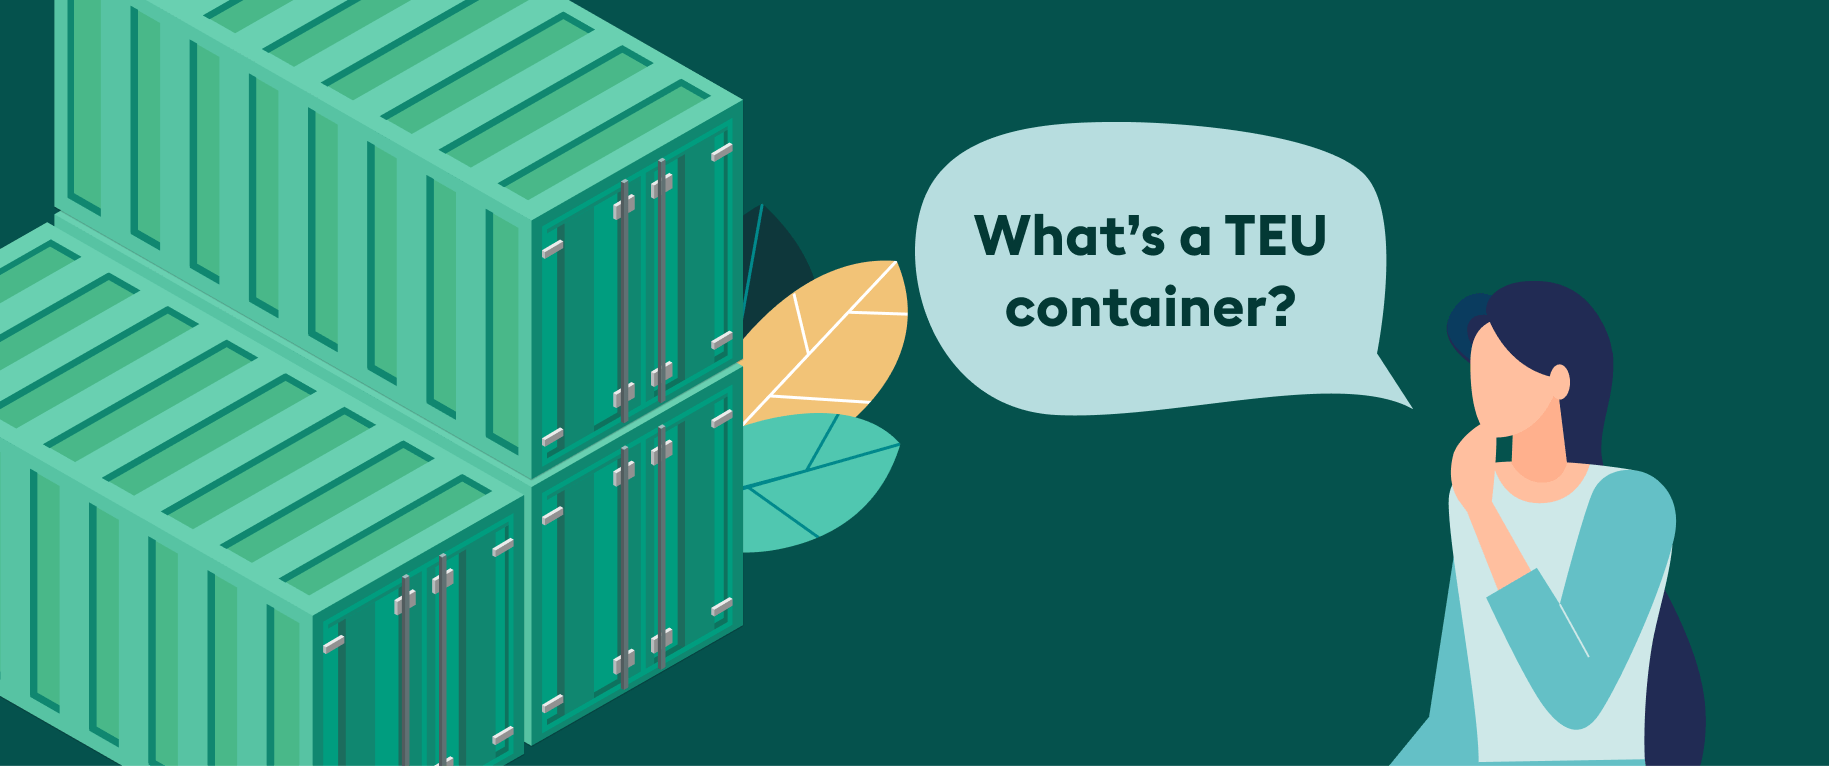 What's a TEU shipping container?